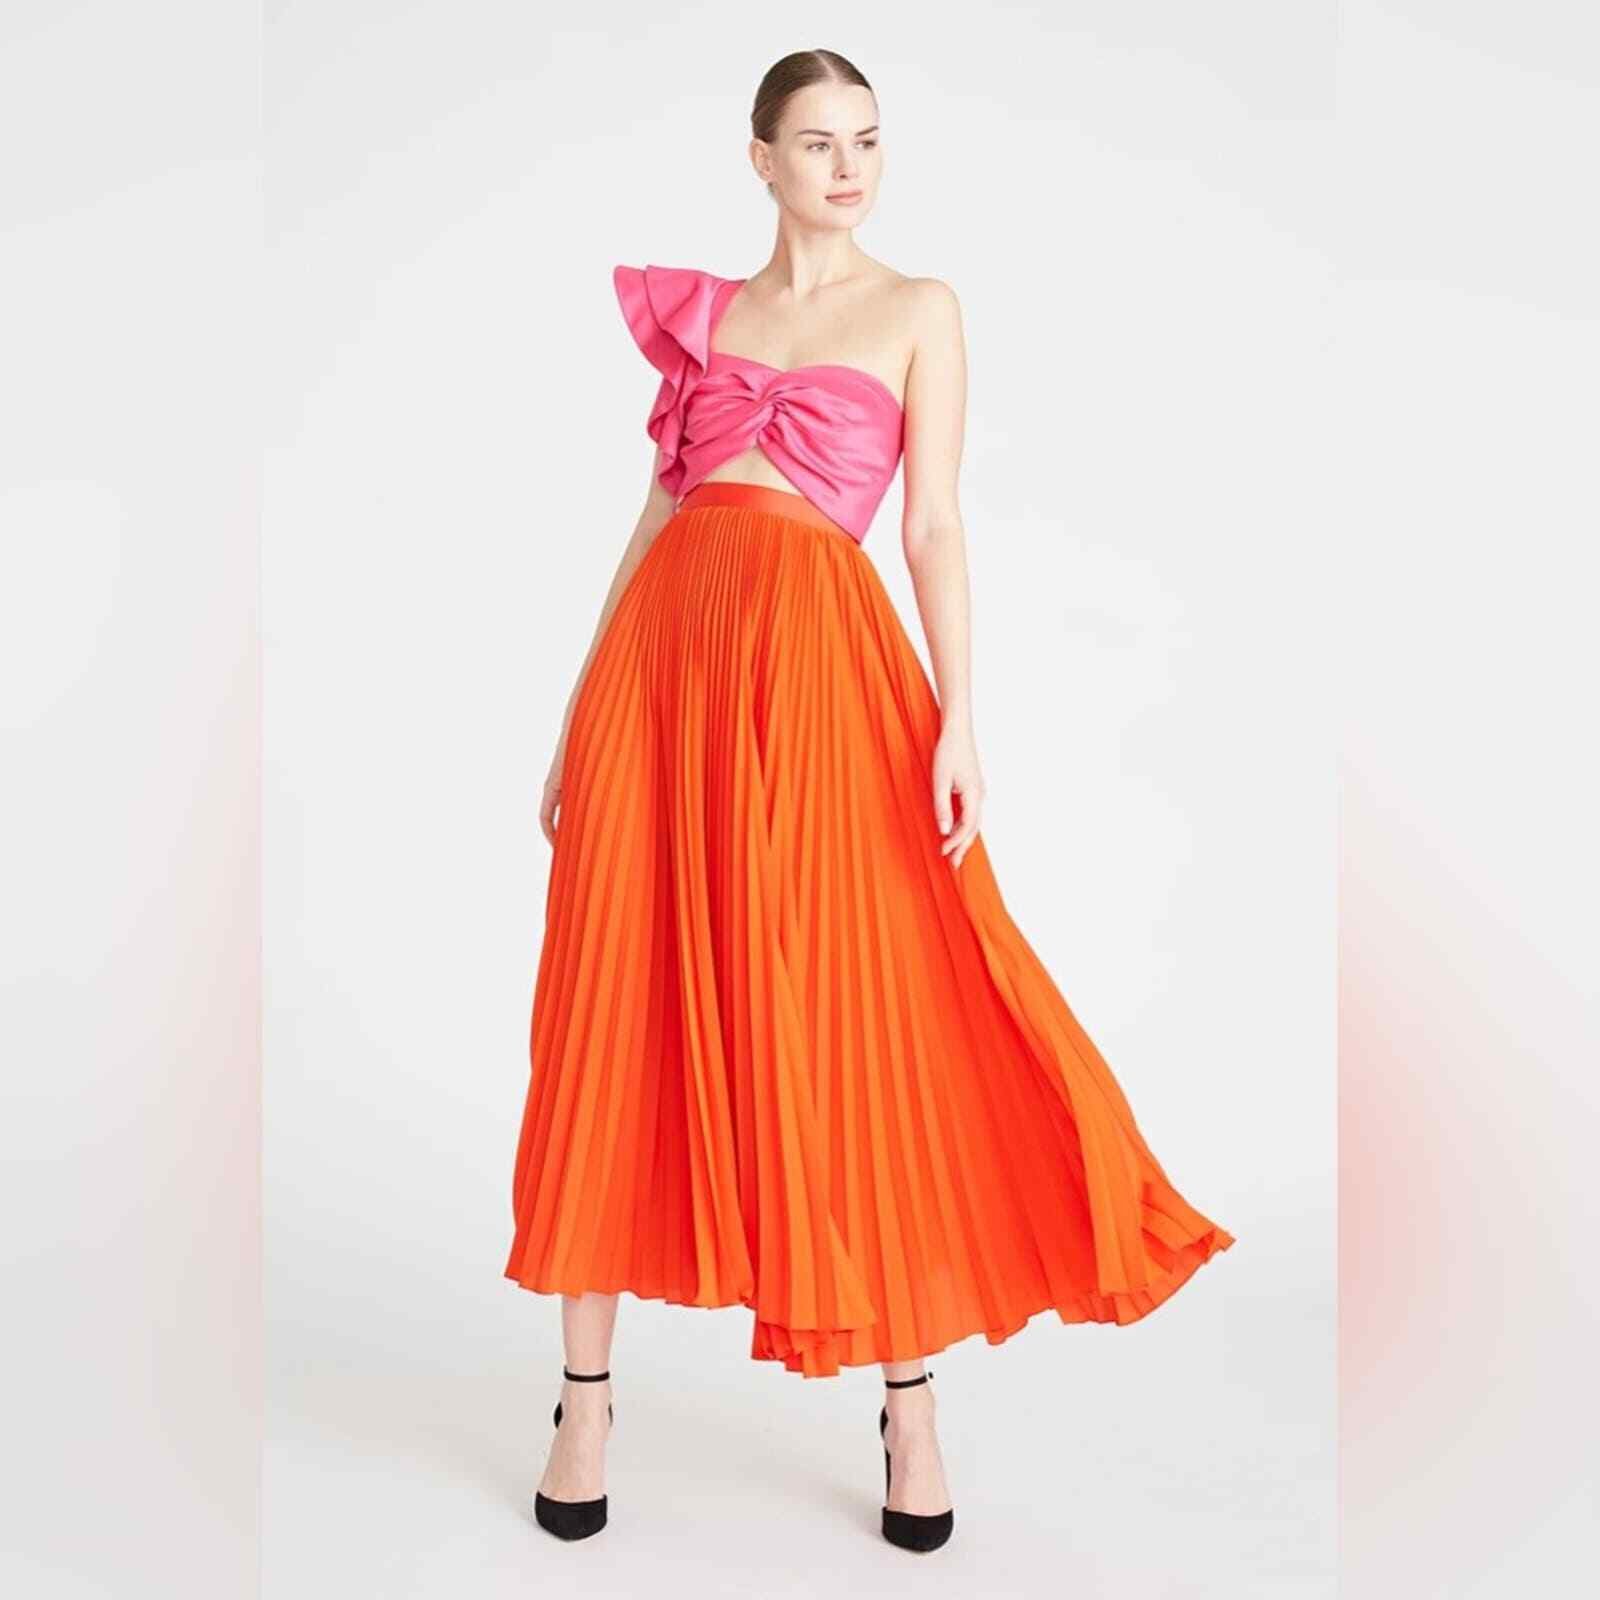 Personality AMUR Cleopatra Pleated Dress red pink one shoulder bow pleated midi dress size 6 PMakAKmGj Factory Price